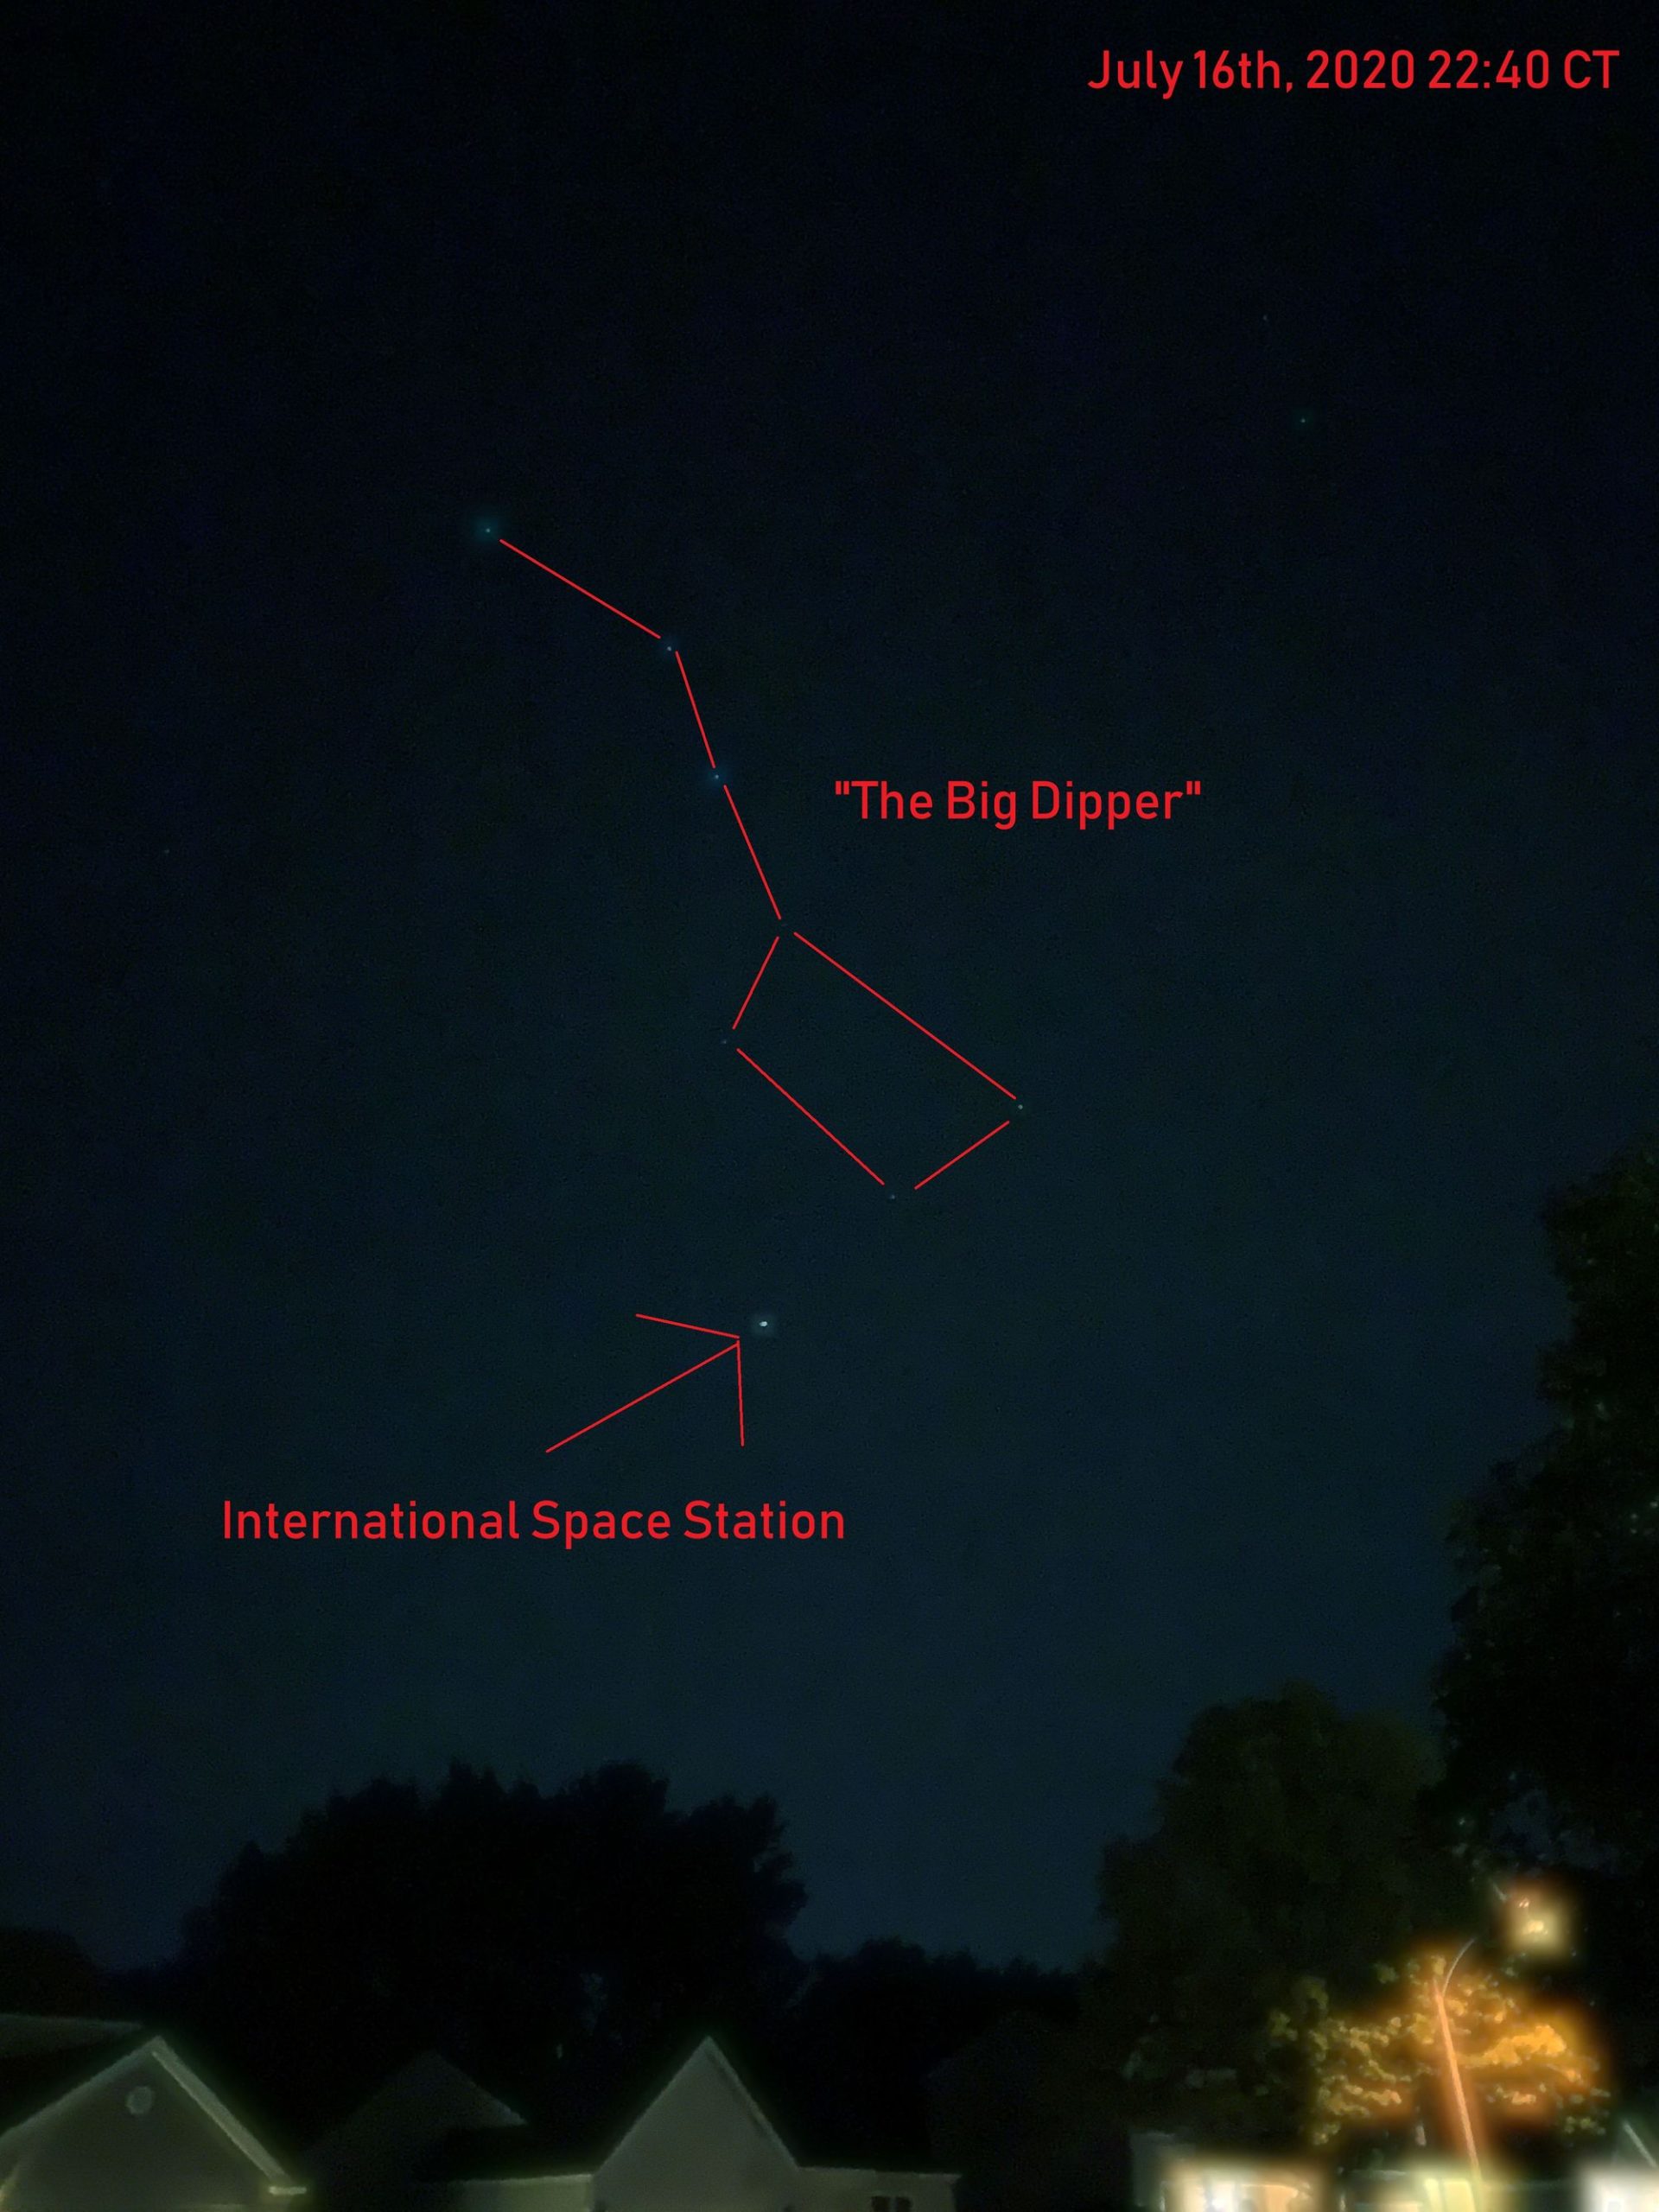 ISS Under the Dipper